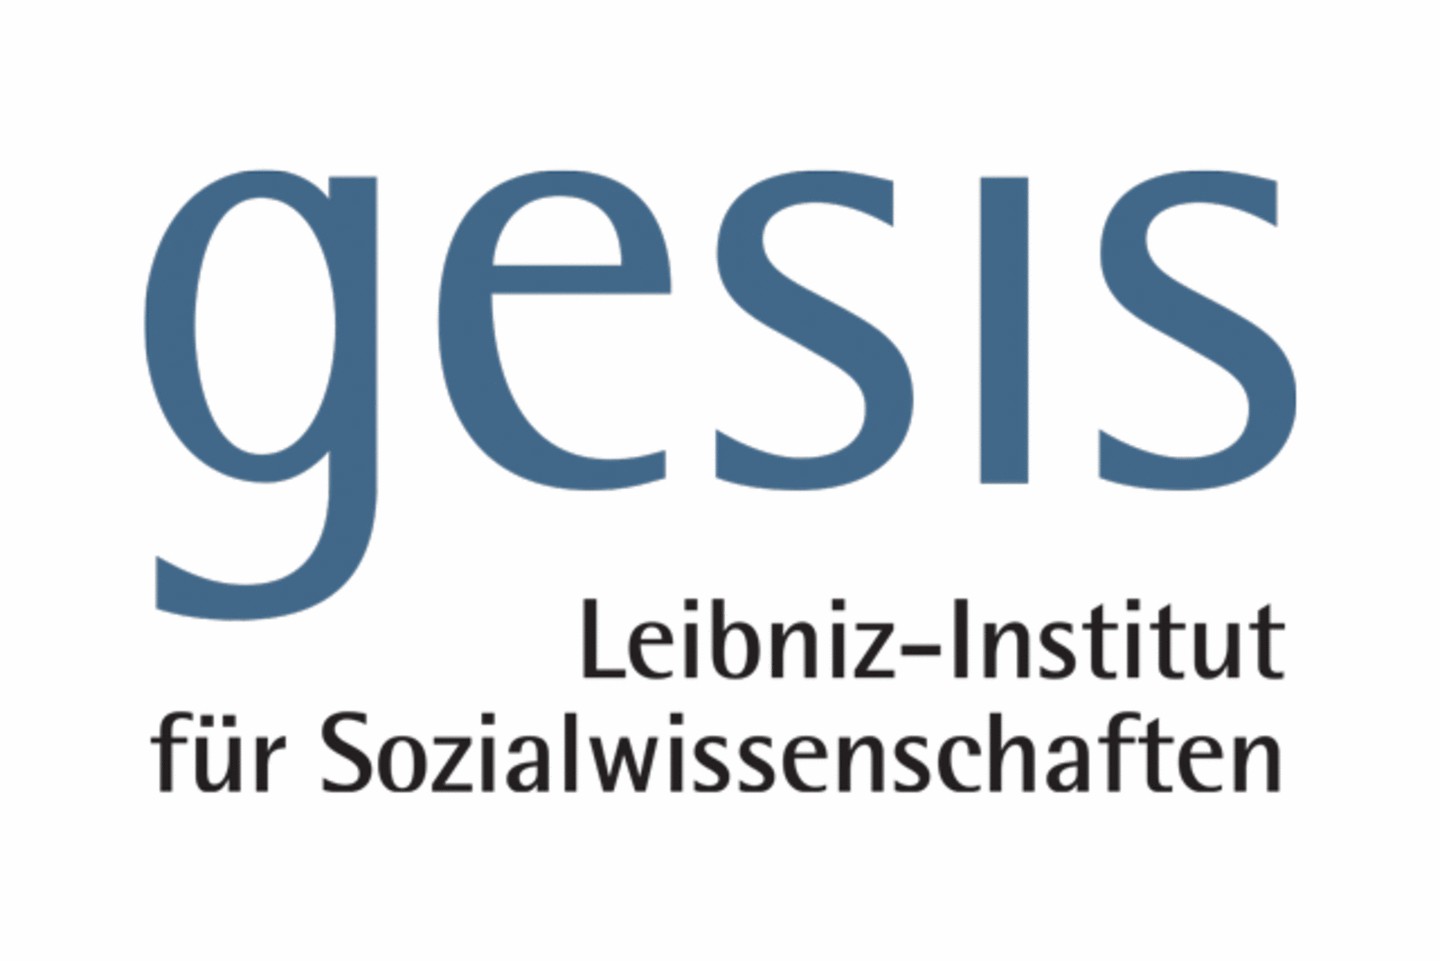 GESIS lecture series